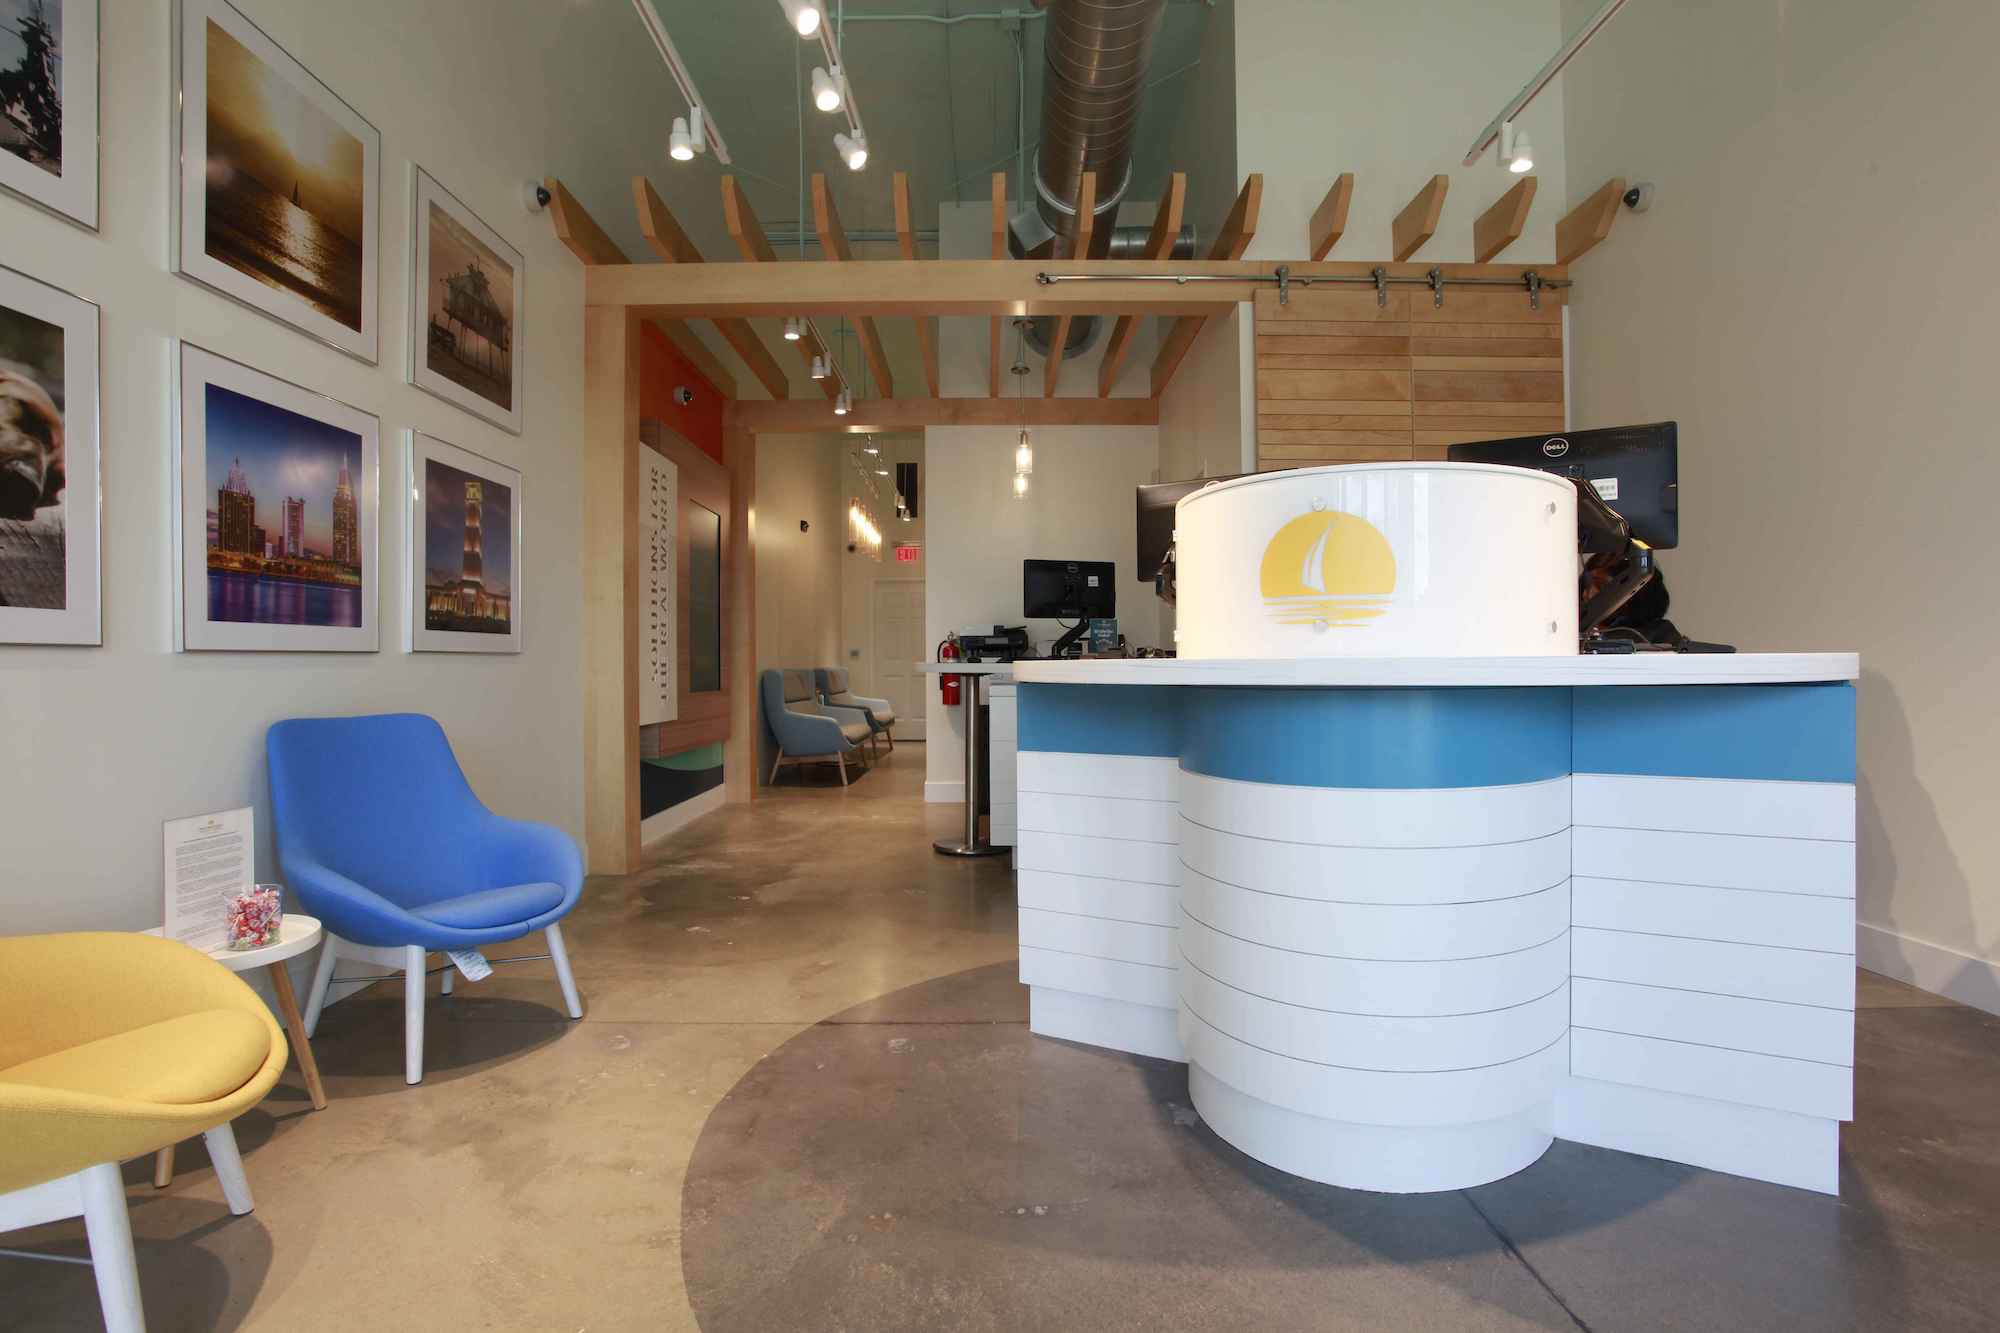 The lobby of New Horizons Credit Union at Rangeline Crossing. In the foreground is a white Teller Pod with a horizontal light blue stripe and a yellow logo of a sailboat on the front. The walls are white and feature framed photographs of local and oceanside scenes. Two chairs sit against one wall, one blue, the other yellow. The room extends back under an awning made of pale blond wood slats.